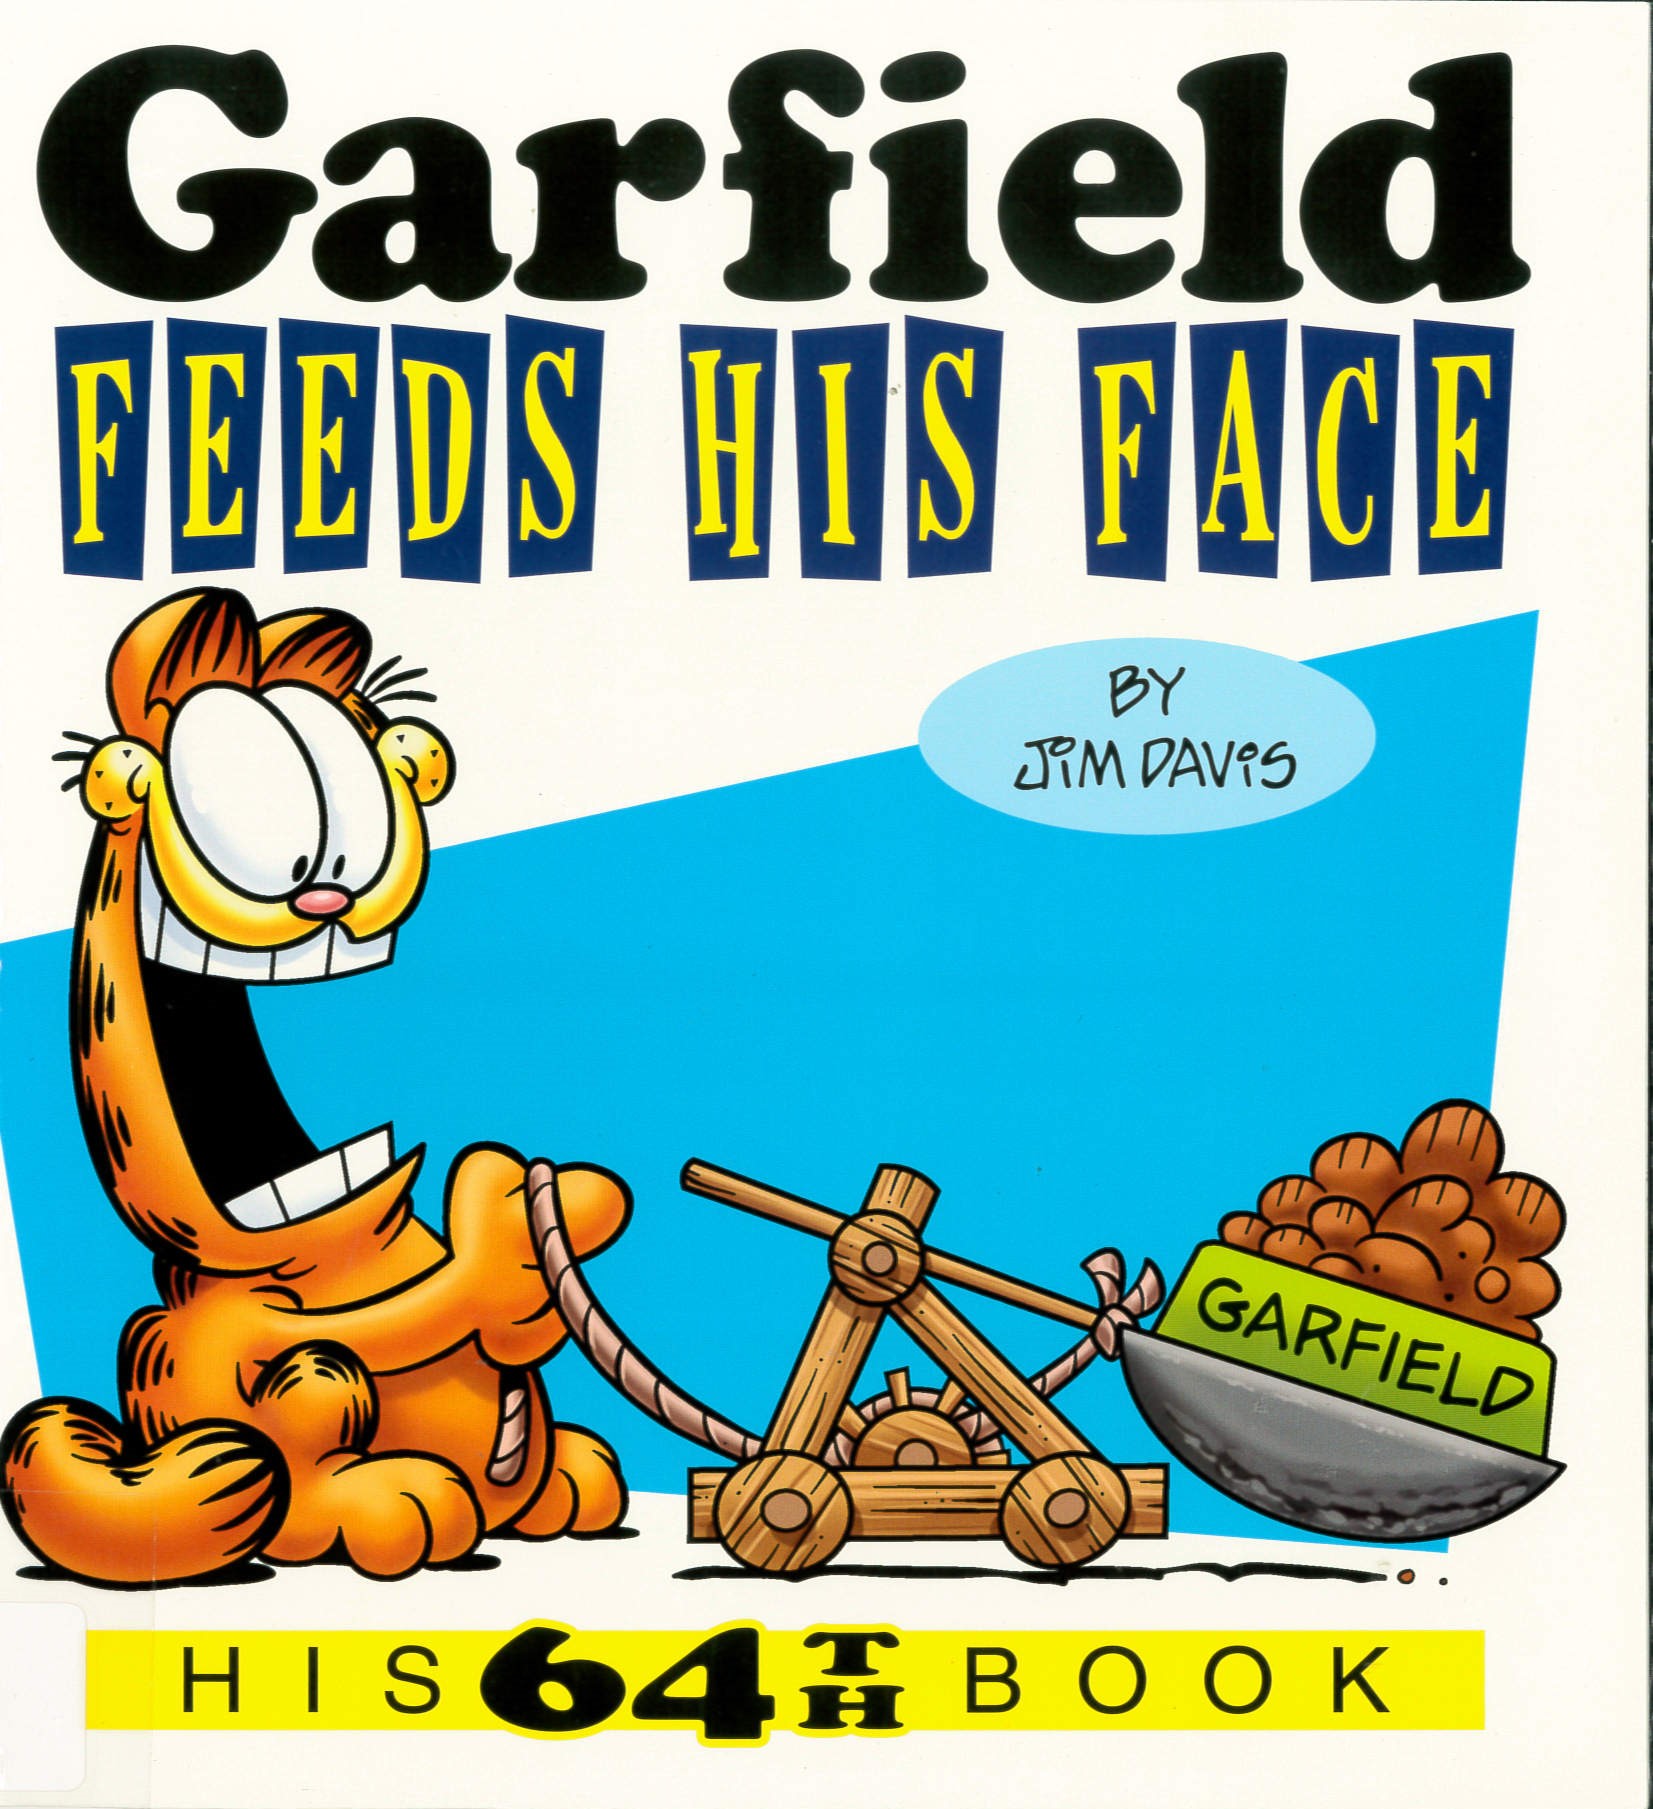 Garfield feeds his face /